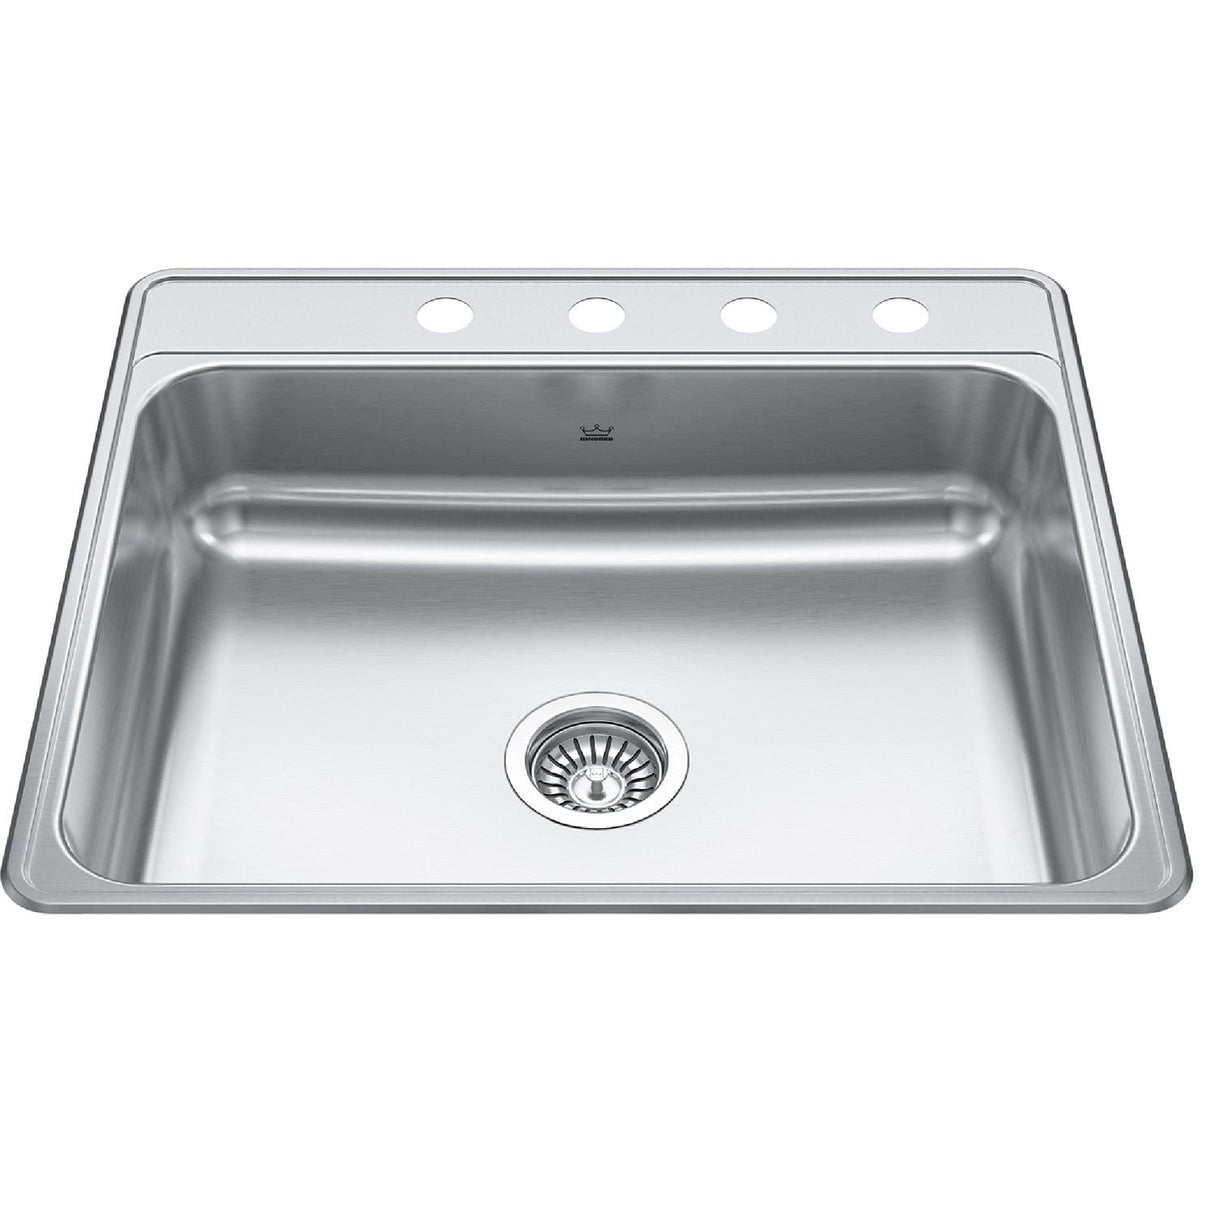 KINDRED CSLA2522-7-4N Creemore 25-in LR x 22-in FB x 7-in DP Drop In Single Bowl 4-Hole Stainless Steel Kitchen Sink In Commercial Satin Finish